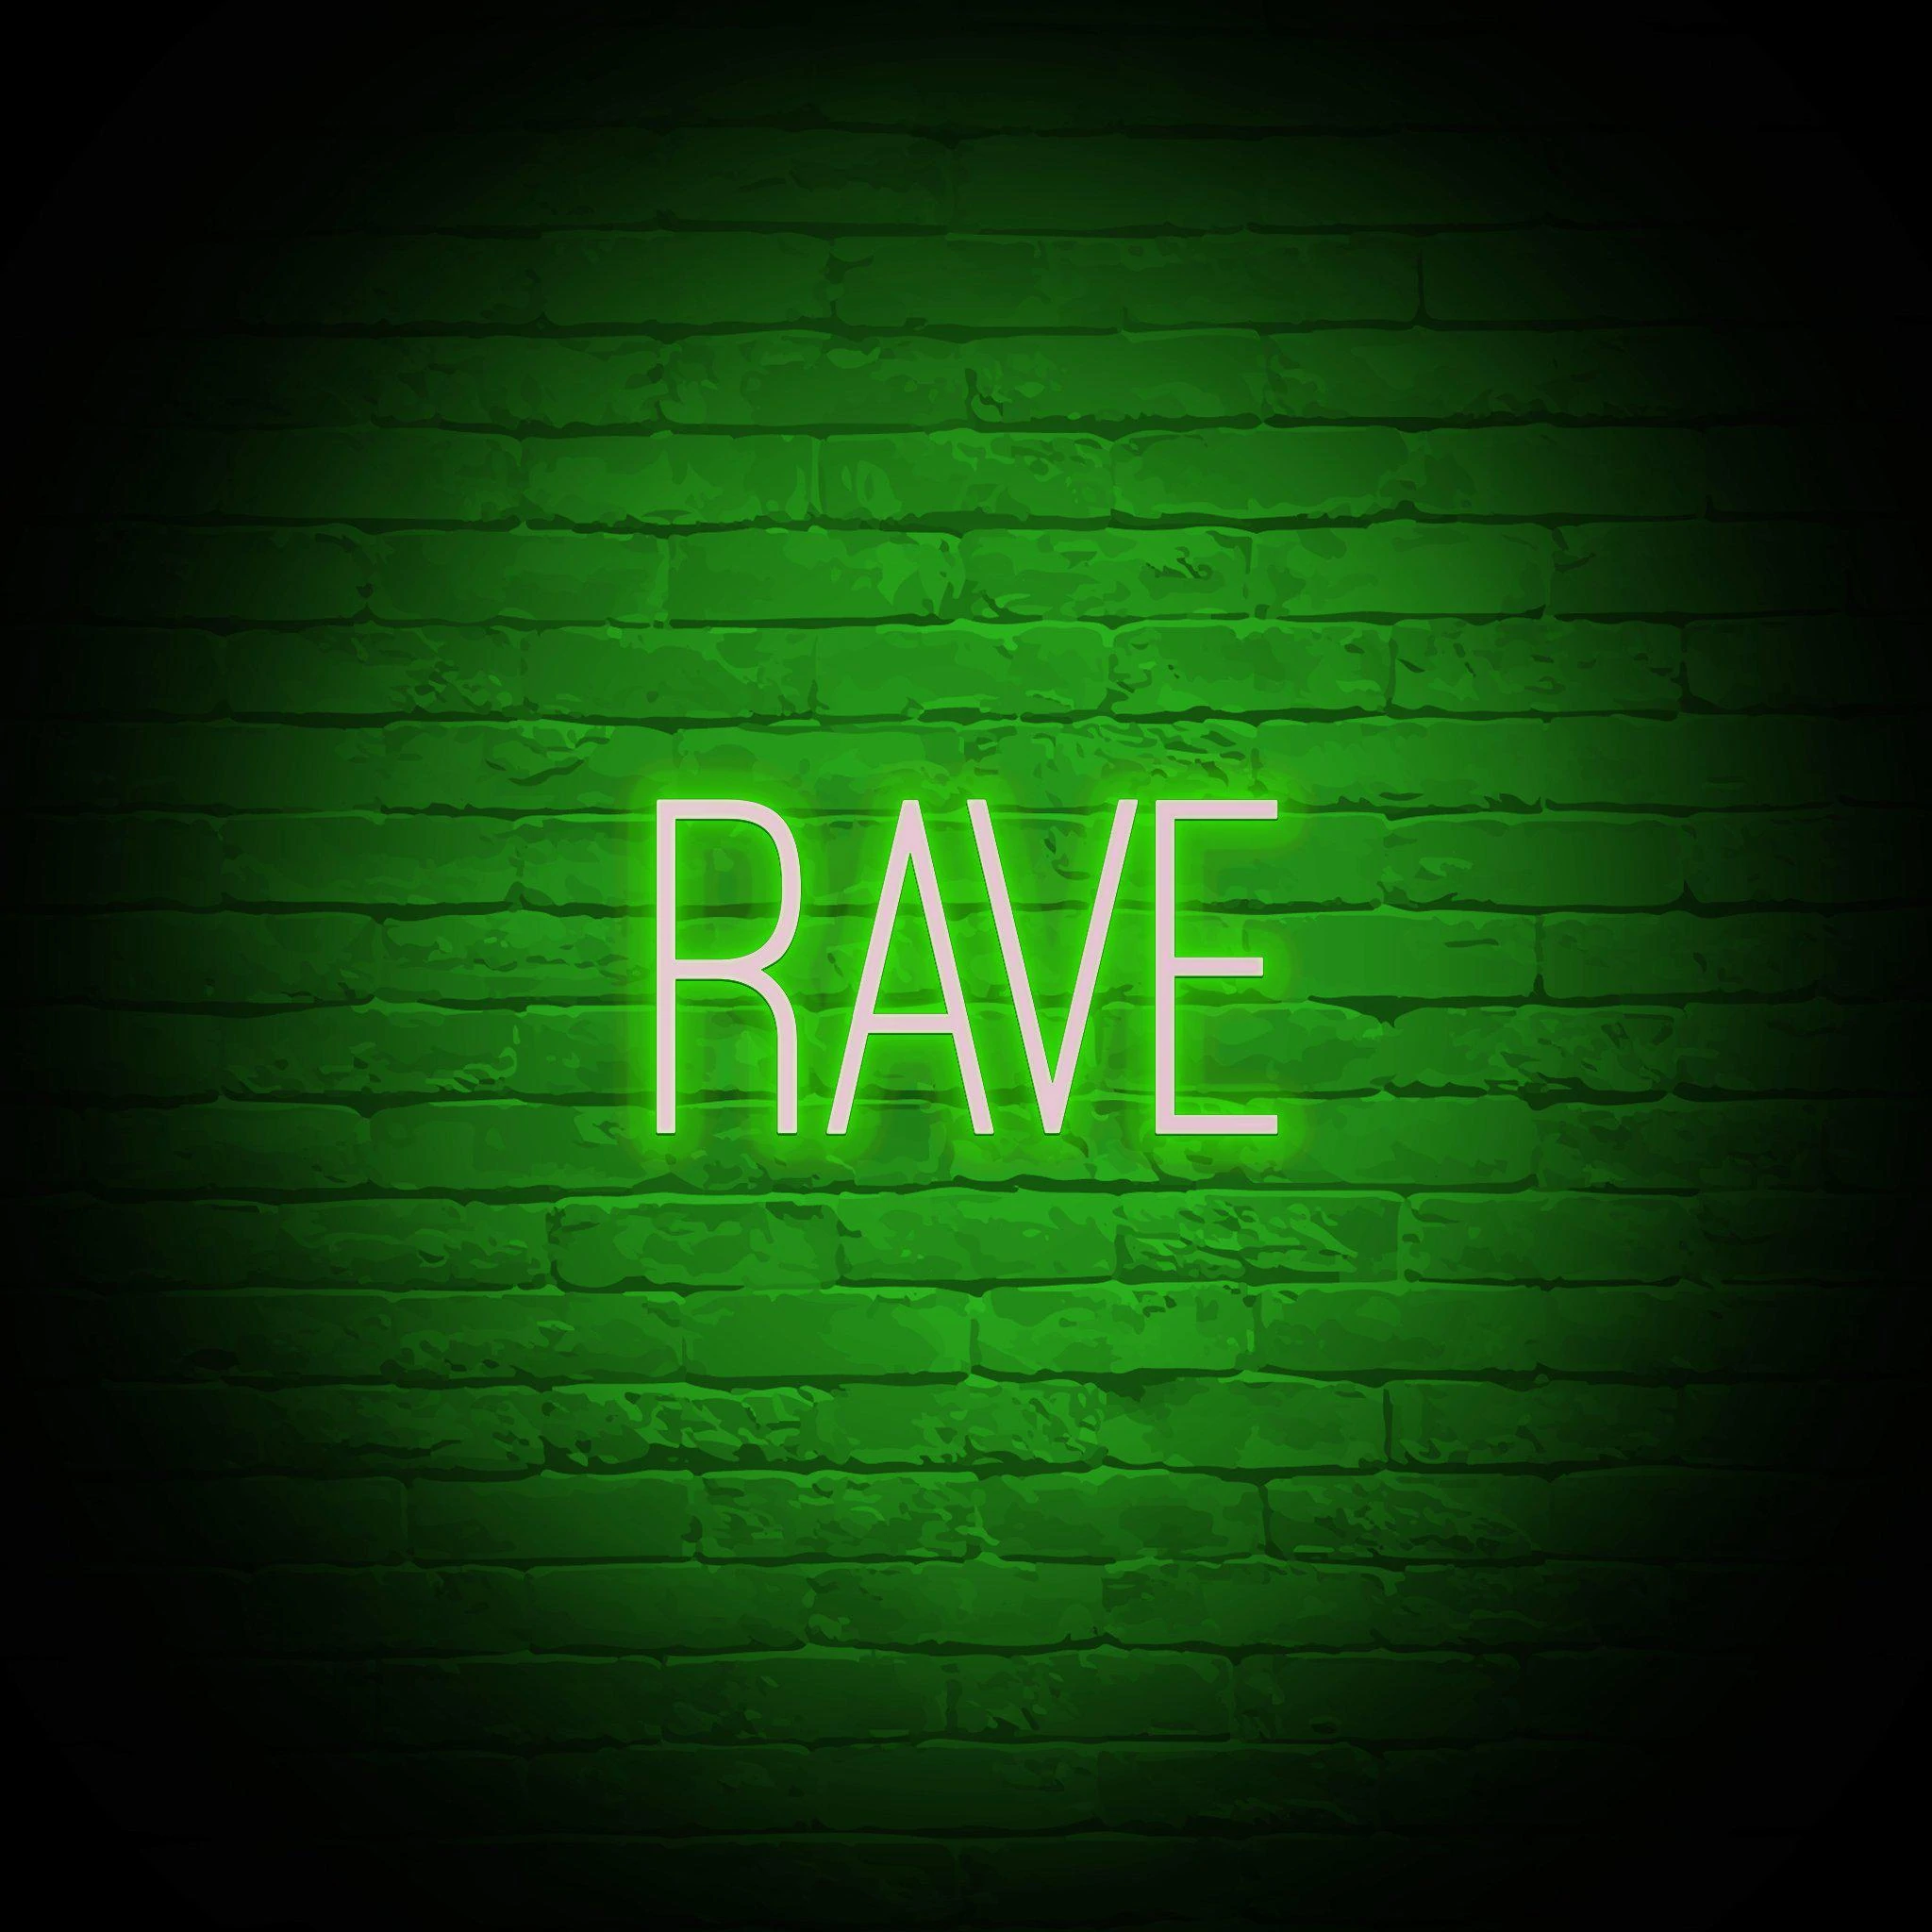 'RAVE' NEON SIGN